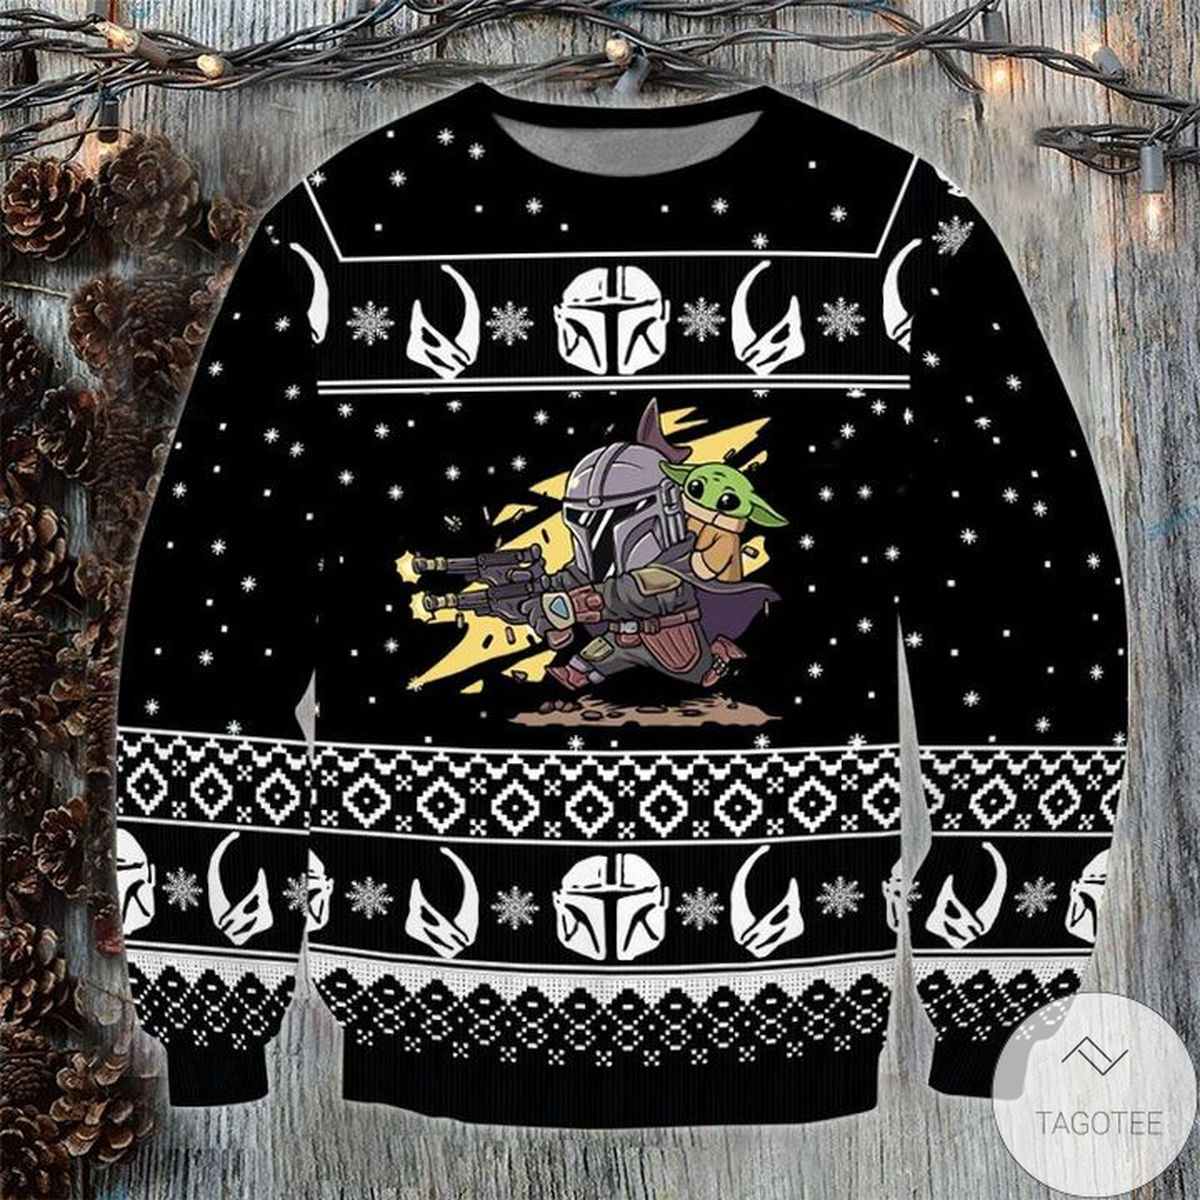 Pew Pew Star Wars Ugly Christmas Sweater